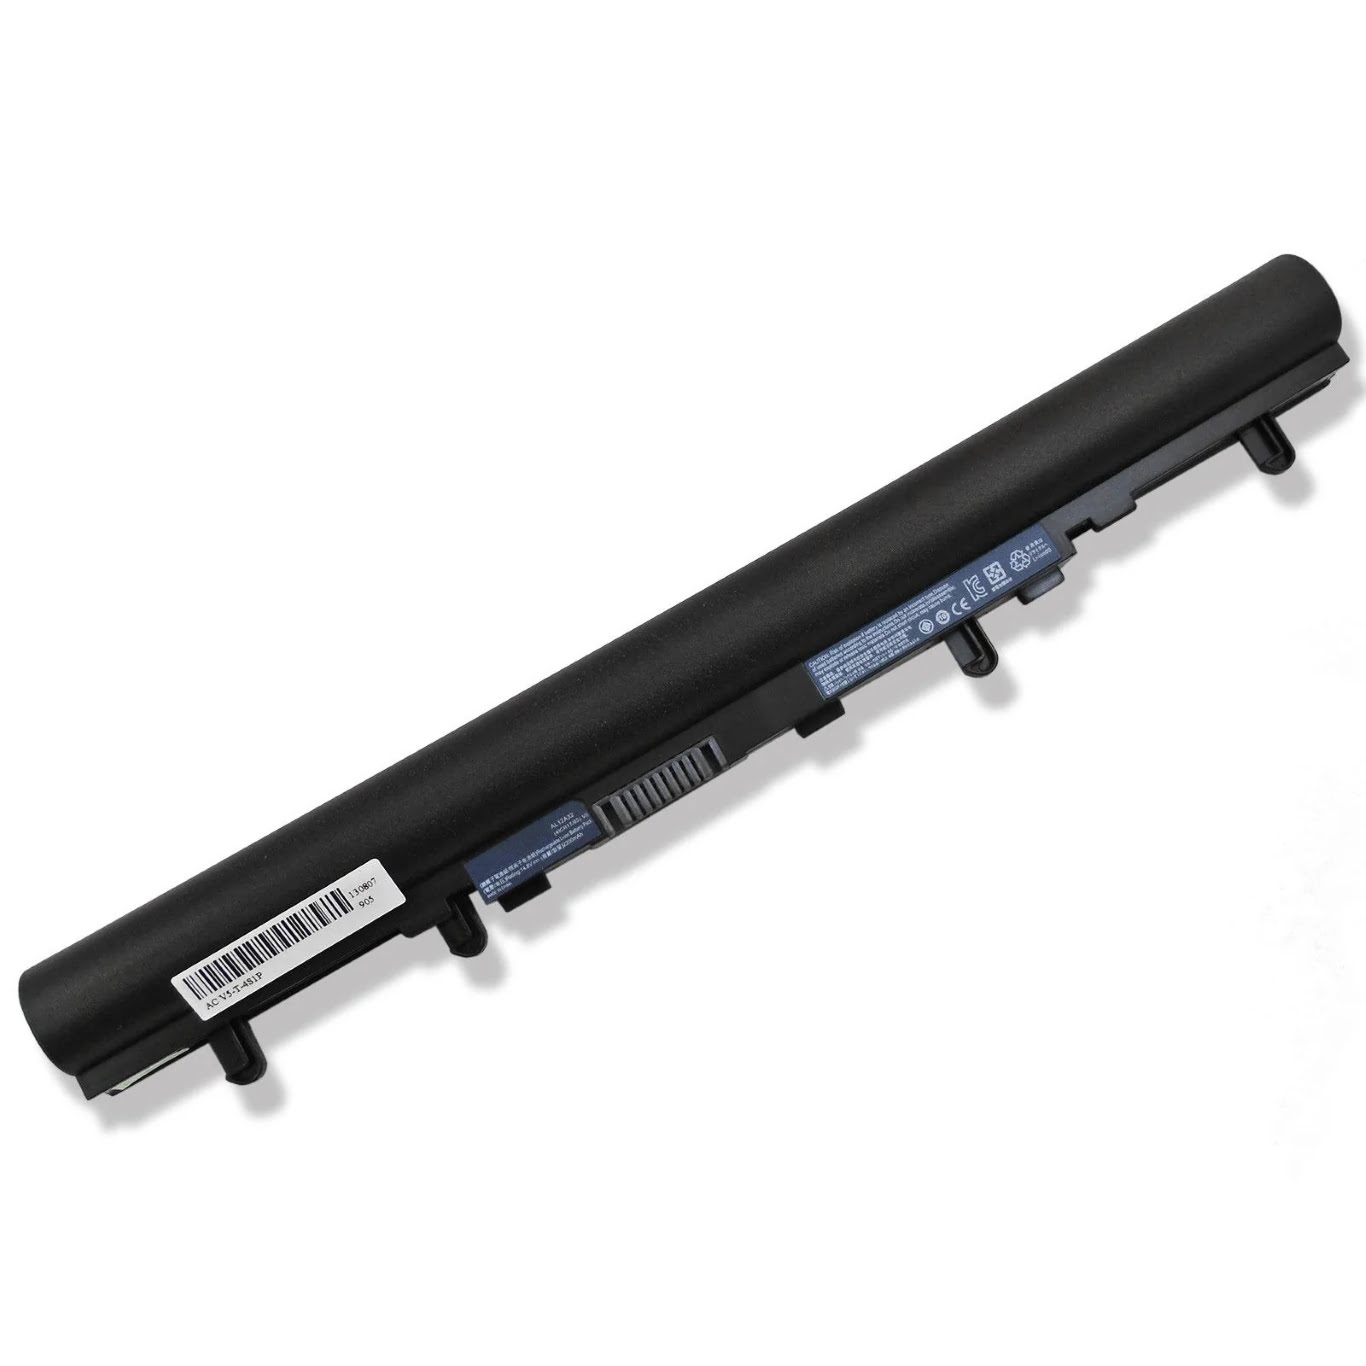 4ICR17/65, AL12A32 replacement Laptop Battery for Acer Aspire S3 Series, Aspire V5 Series, 2200mAh, 4 cells, 14.8V